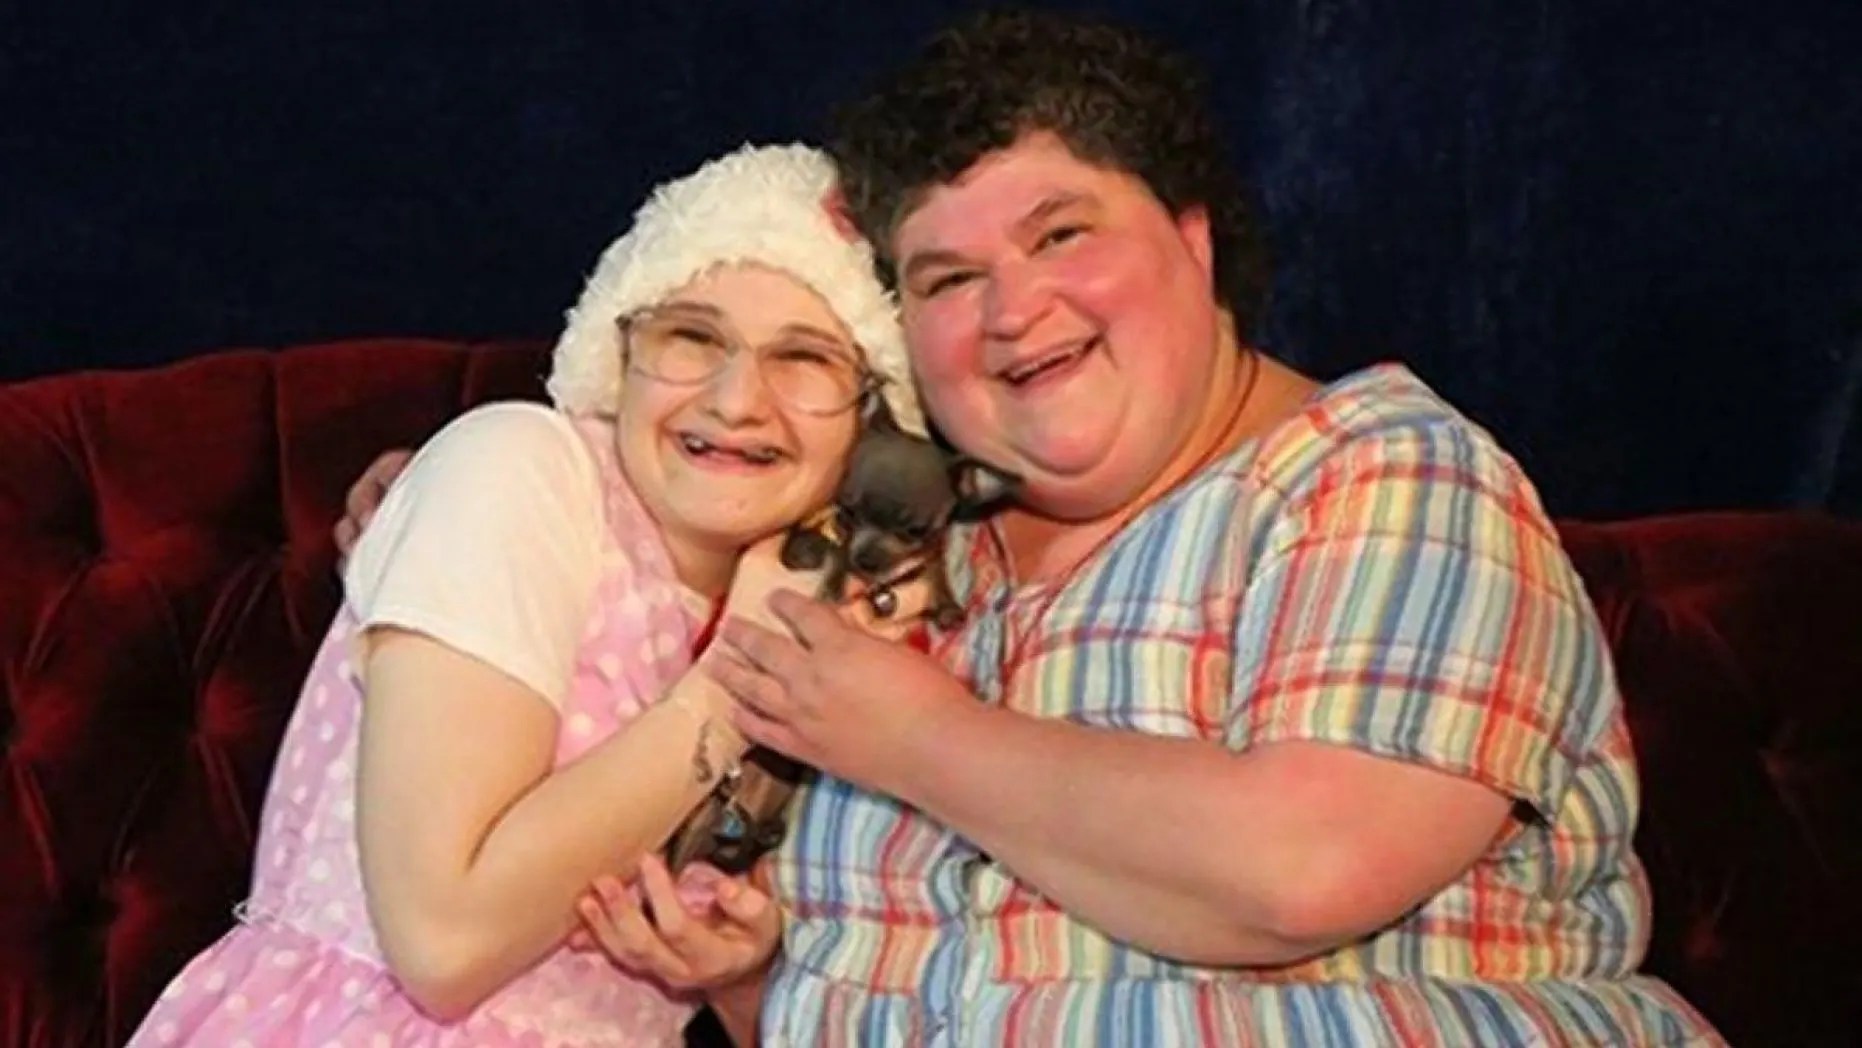 Gypsy Rose Blanchard is engaged to man who contacted her in prison